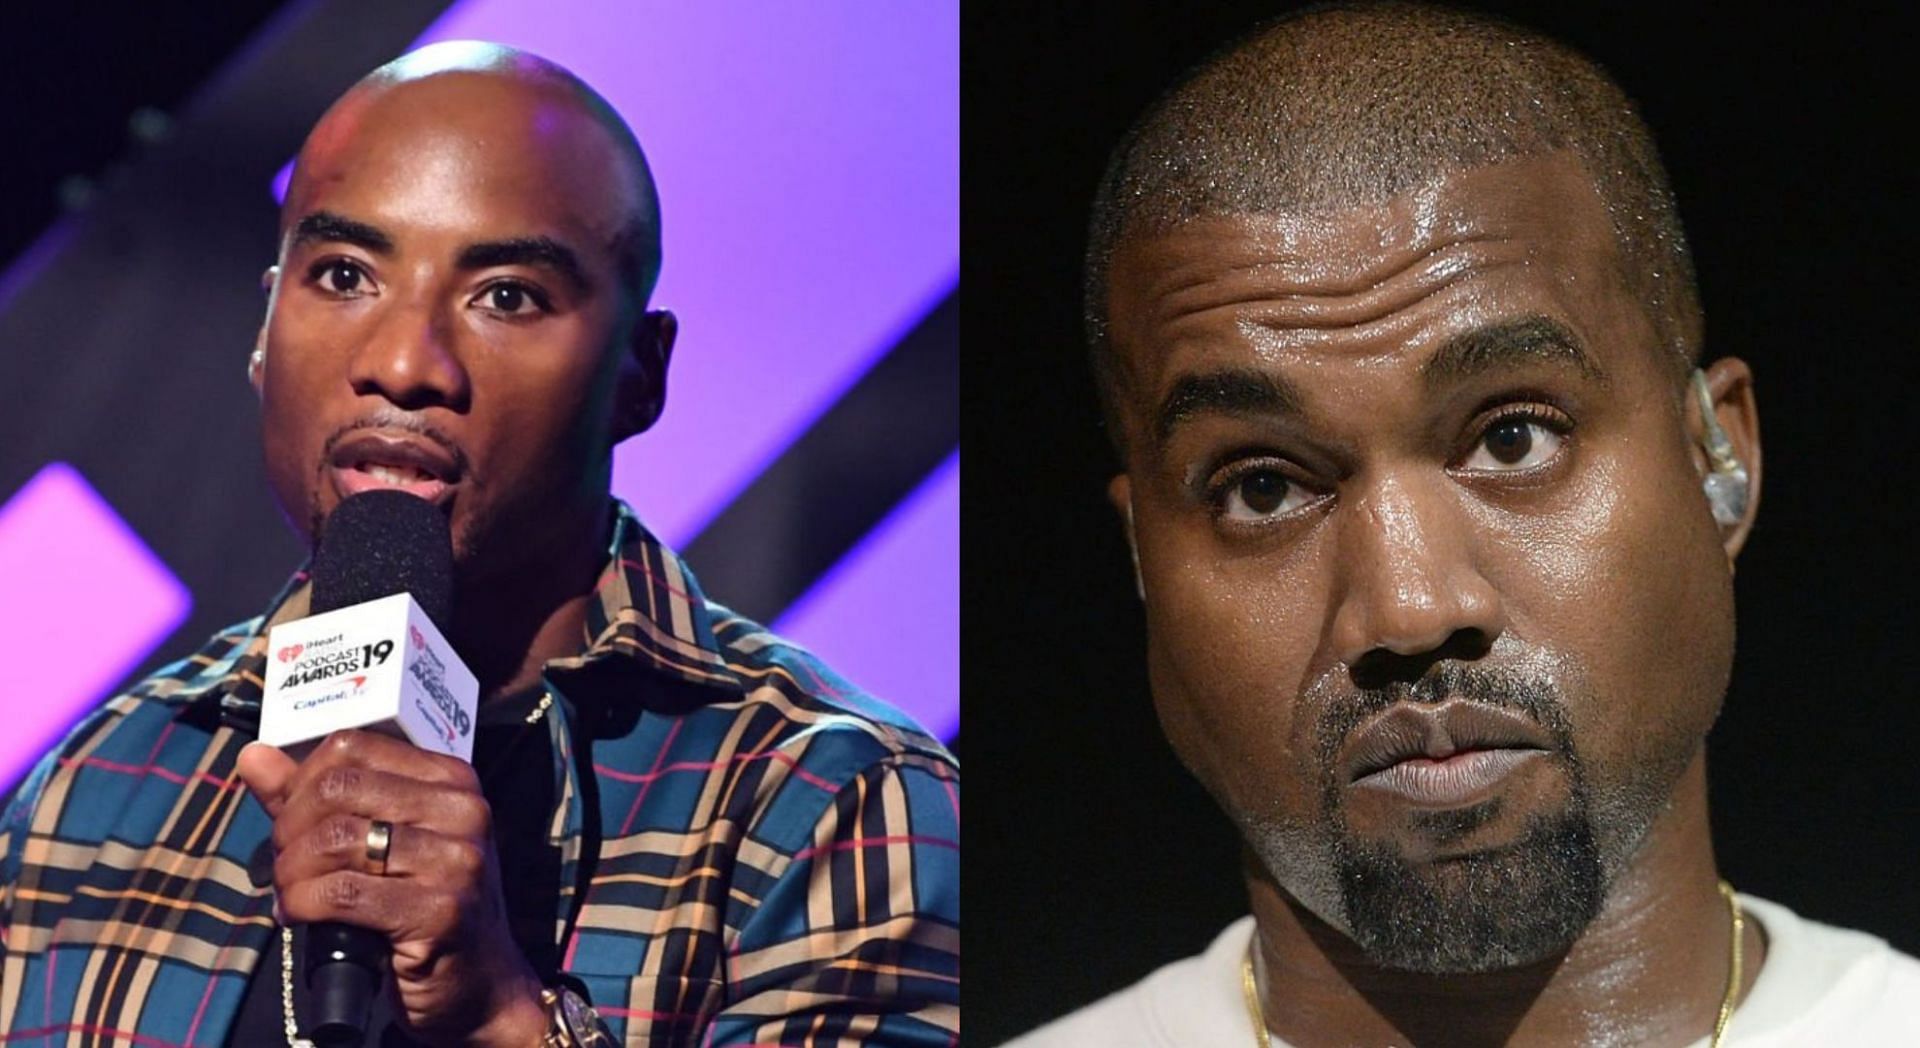 Charlamagne Tha God called out Kanye West over the latter